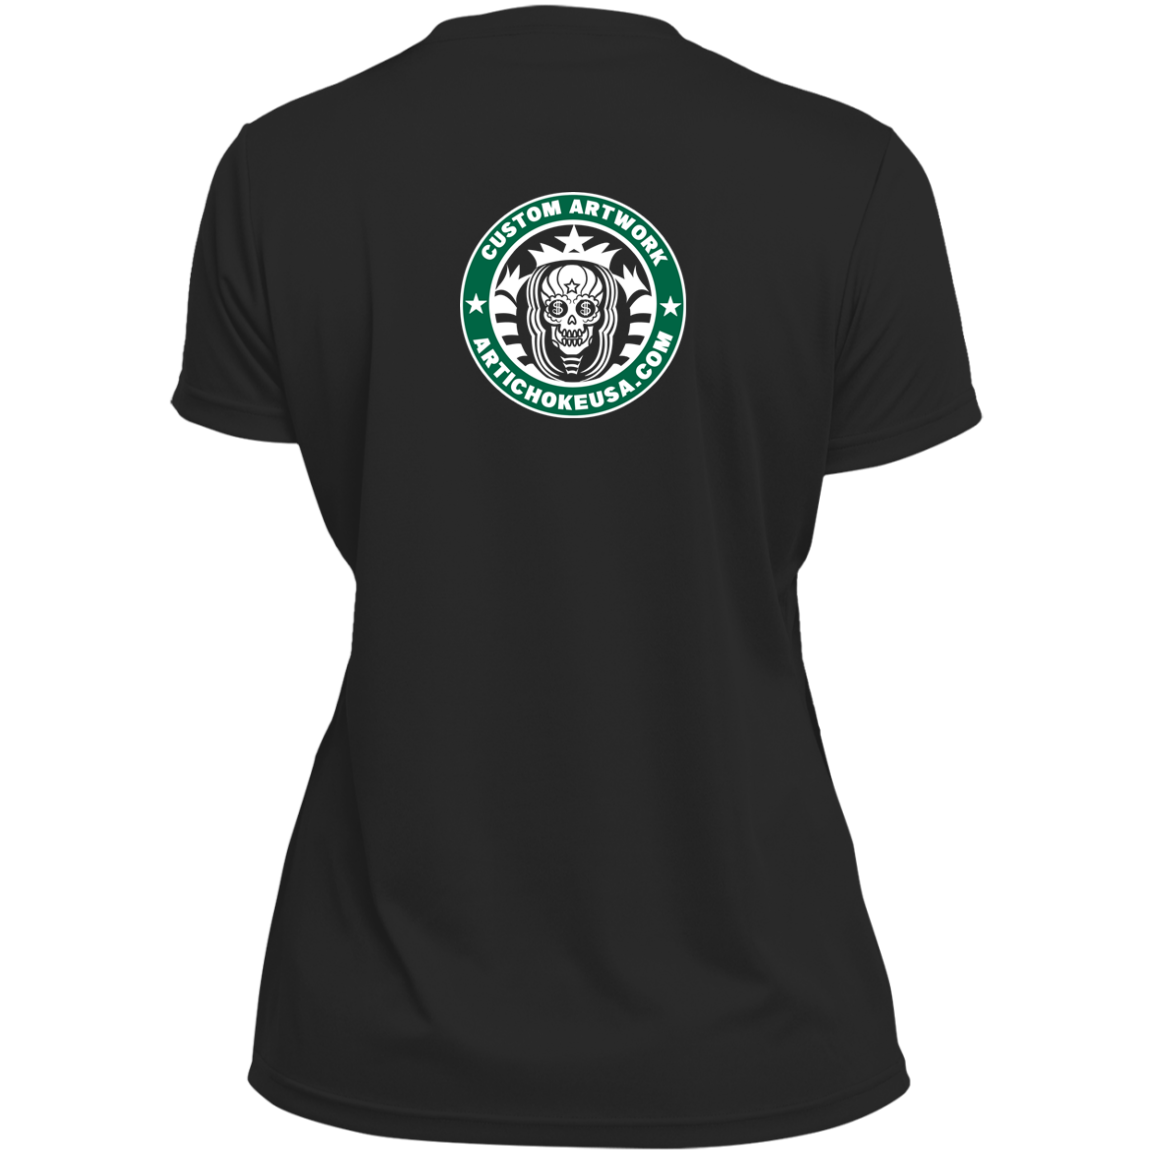 ArtichokeUSA Custom Design. Money Can't Buy Happiness But It Can Buy You Coffee. Ladies’ Moisture-Wicking V-Neck Tee